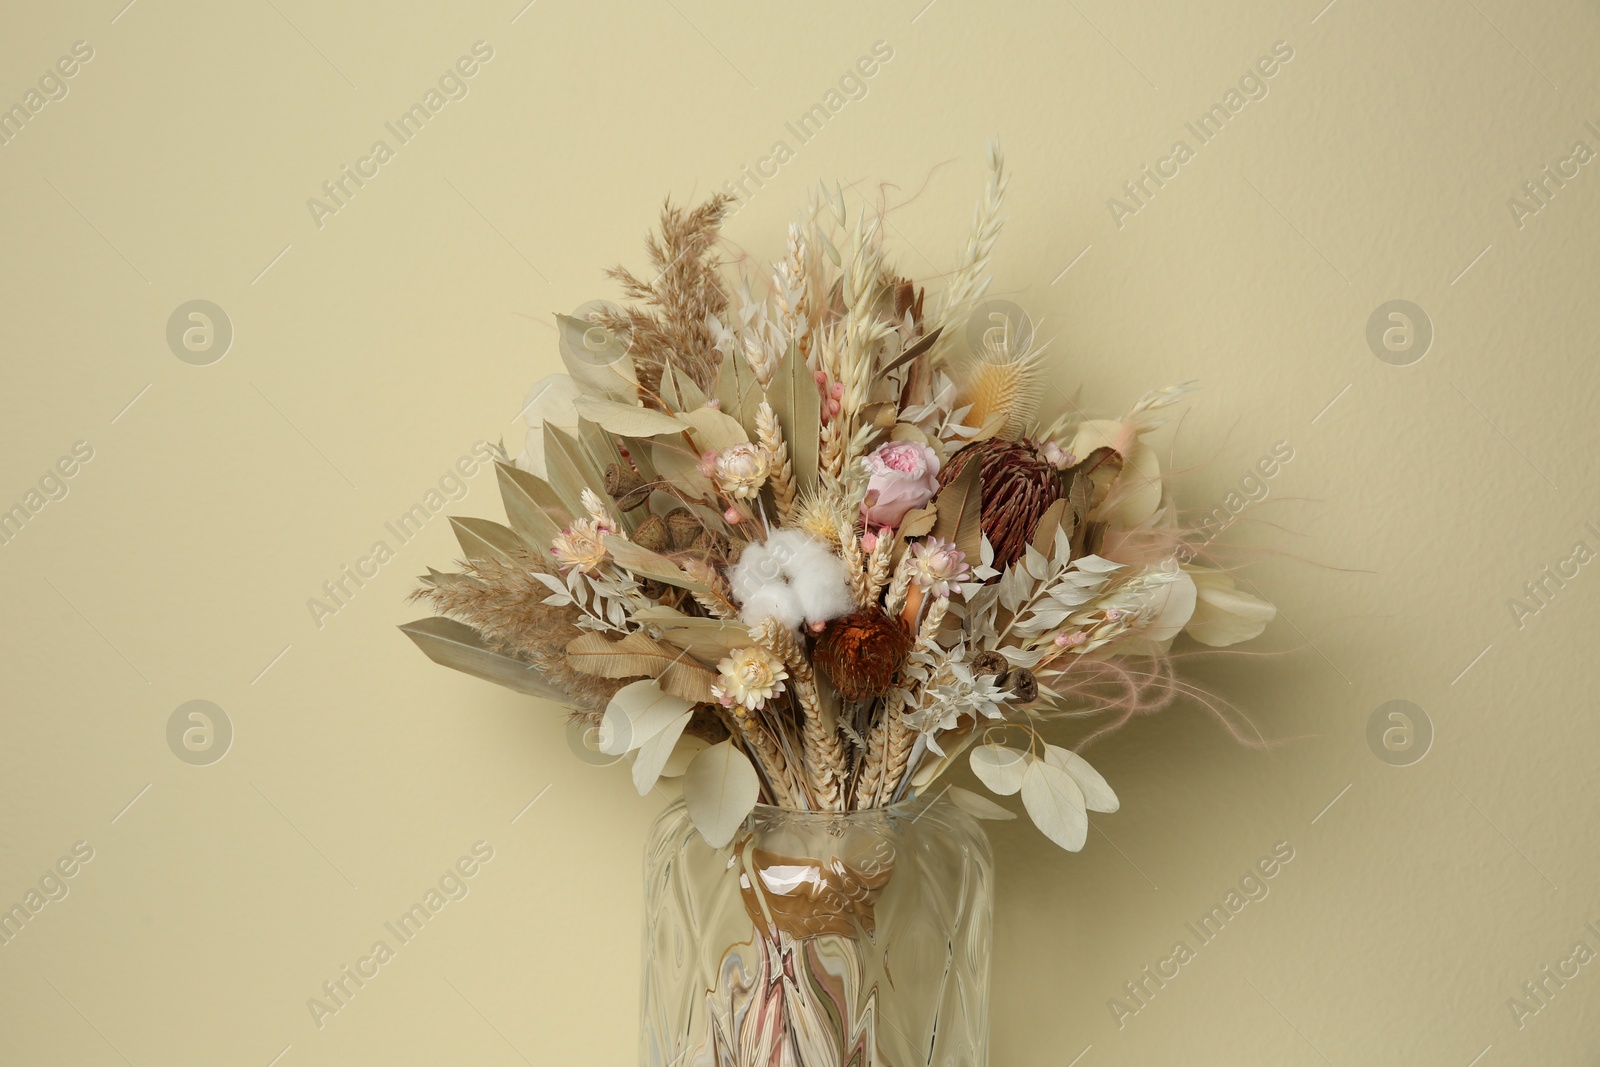 Photo of Beautiful dried flower bouquet in glass vase against beige background